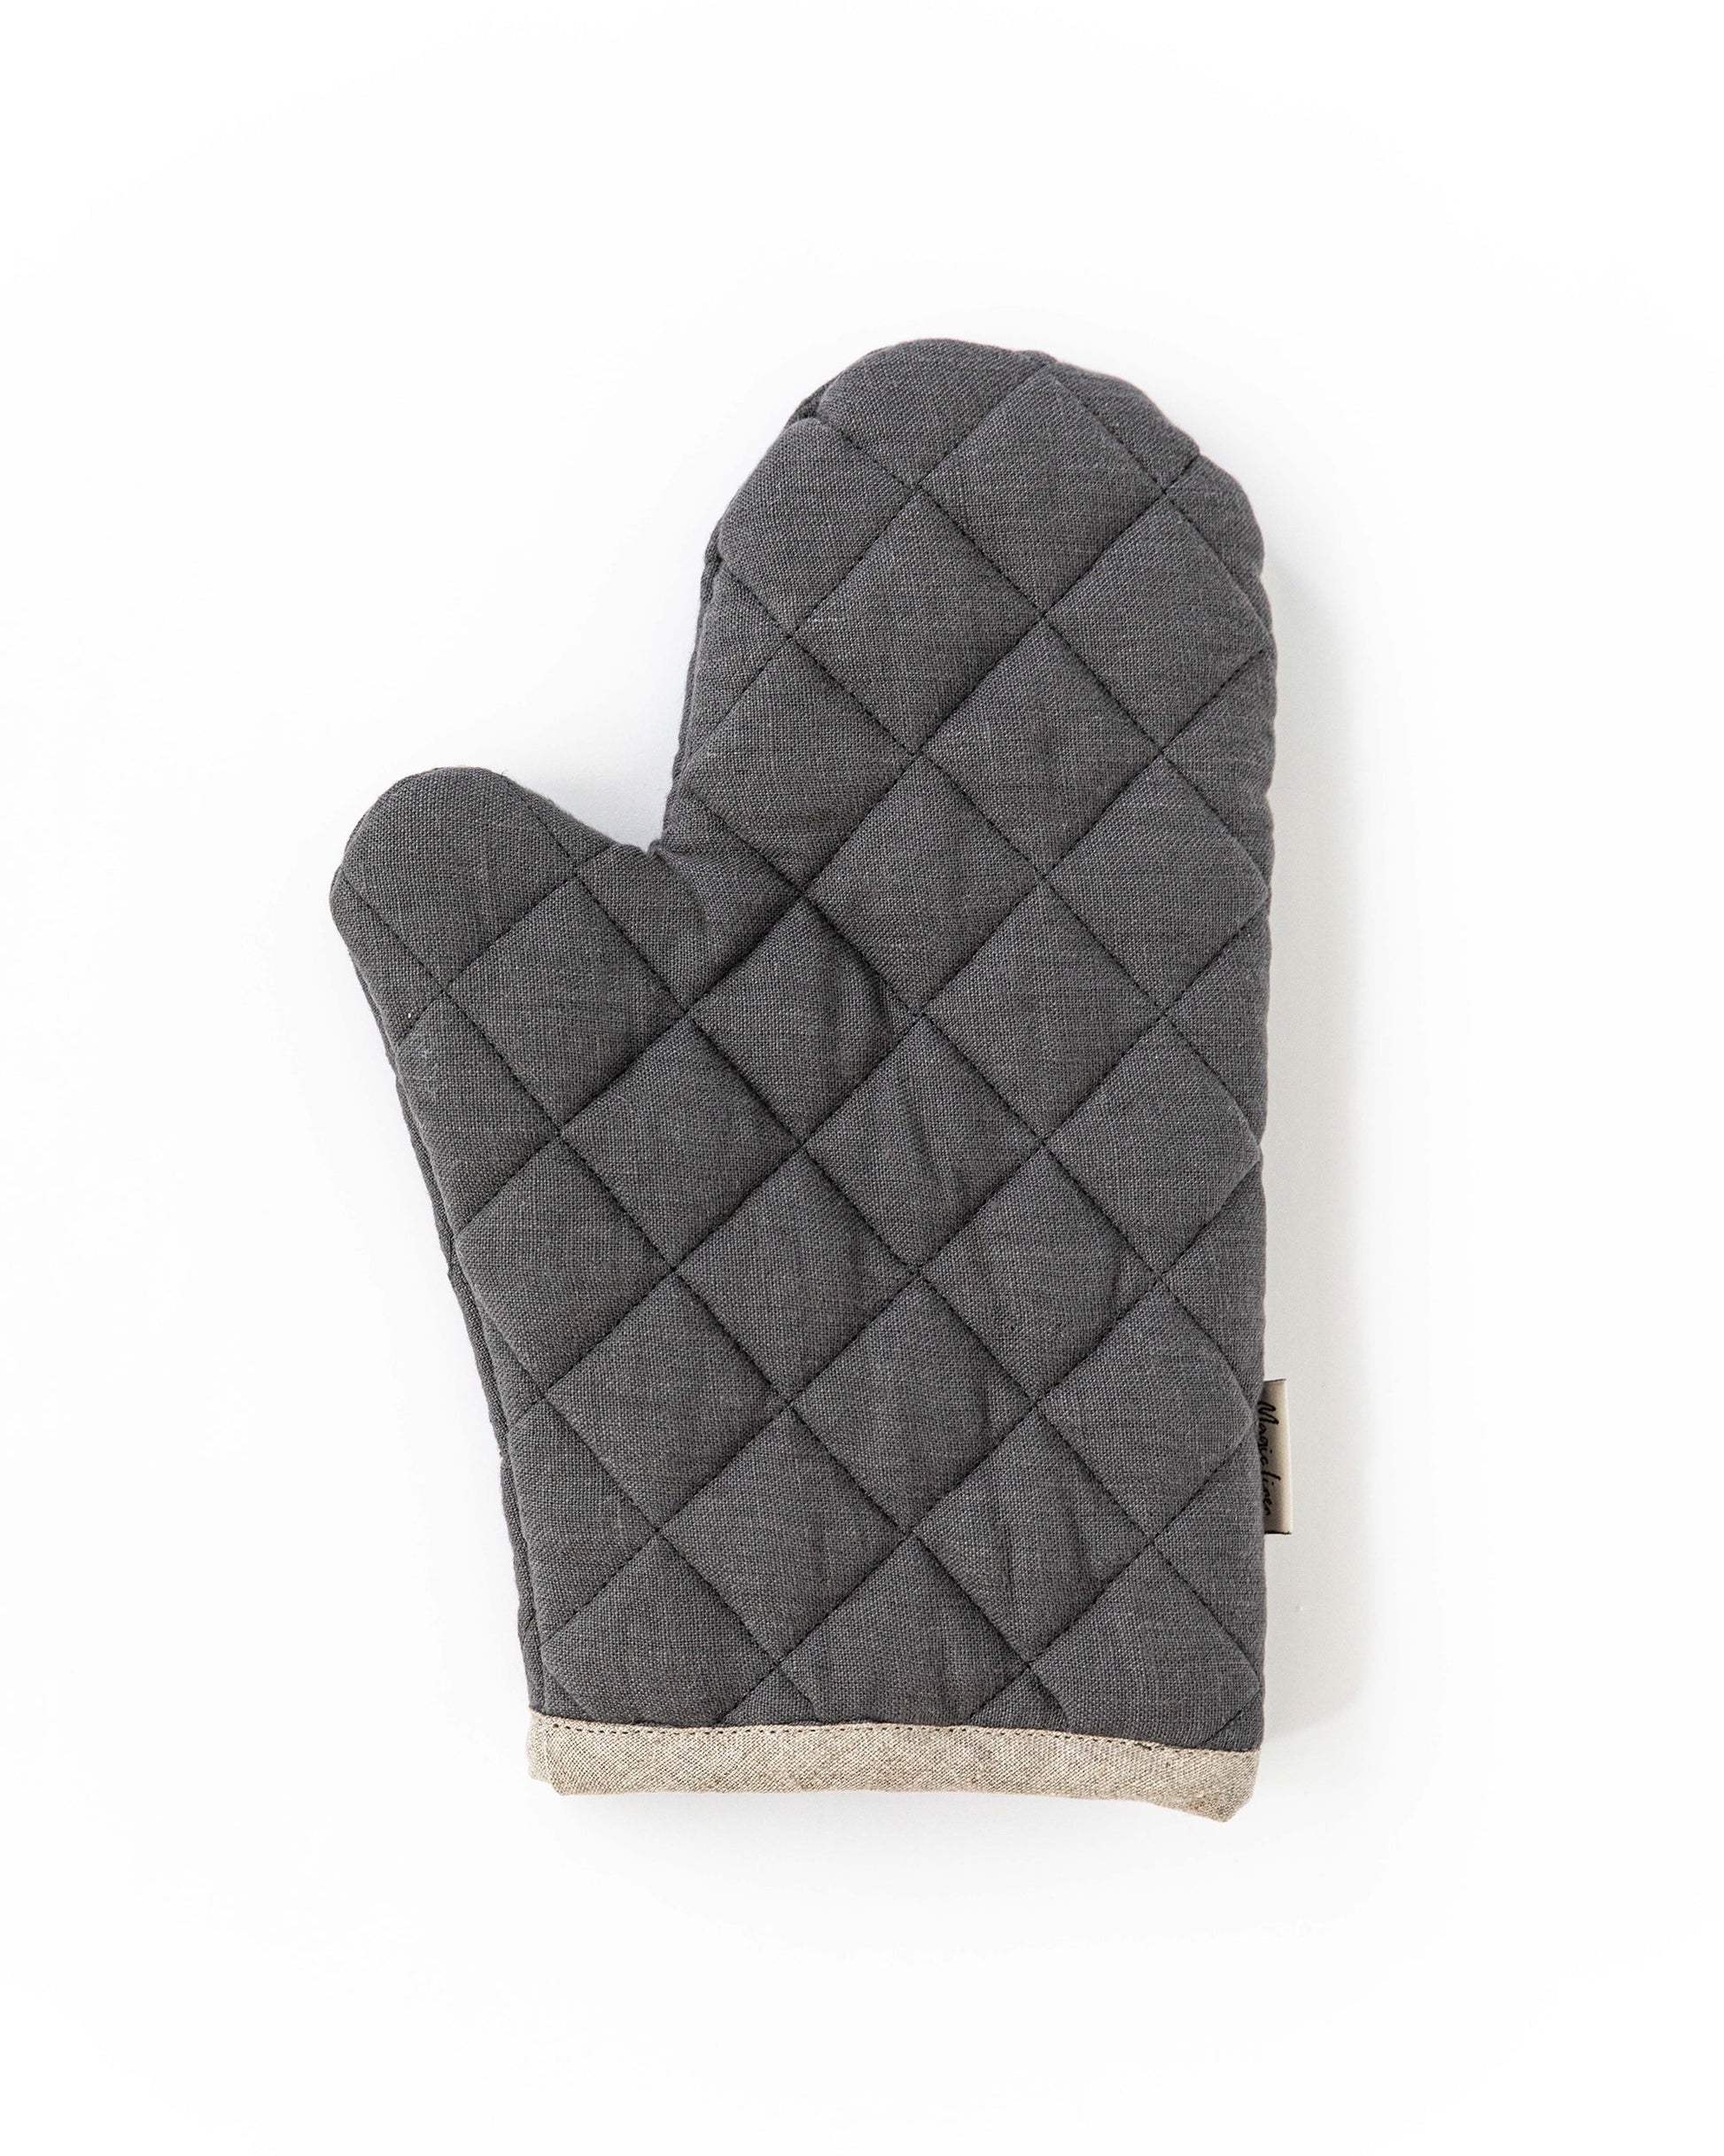 Charcoal Grey Velvet Oven Mitts Set of 2 + Reviews